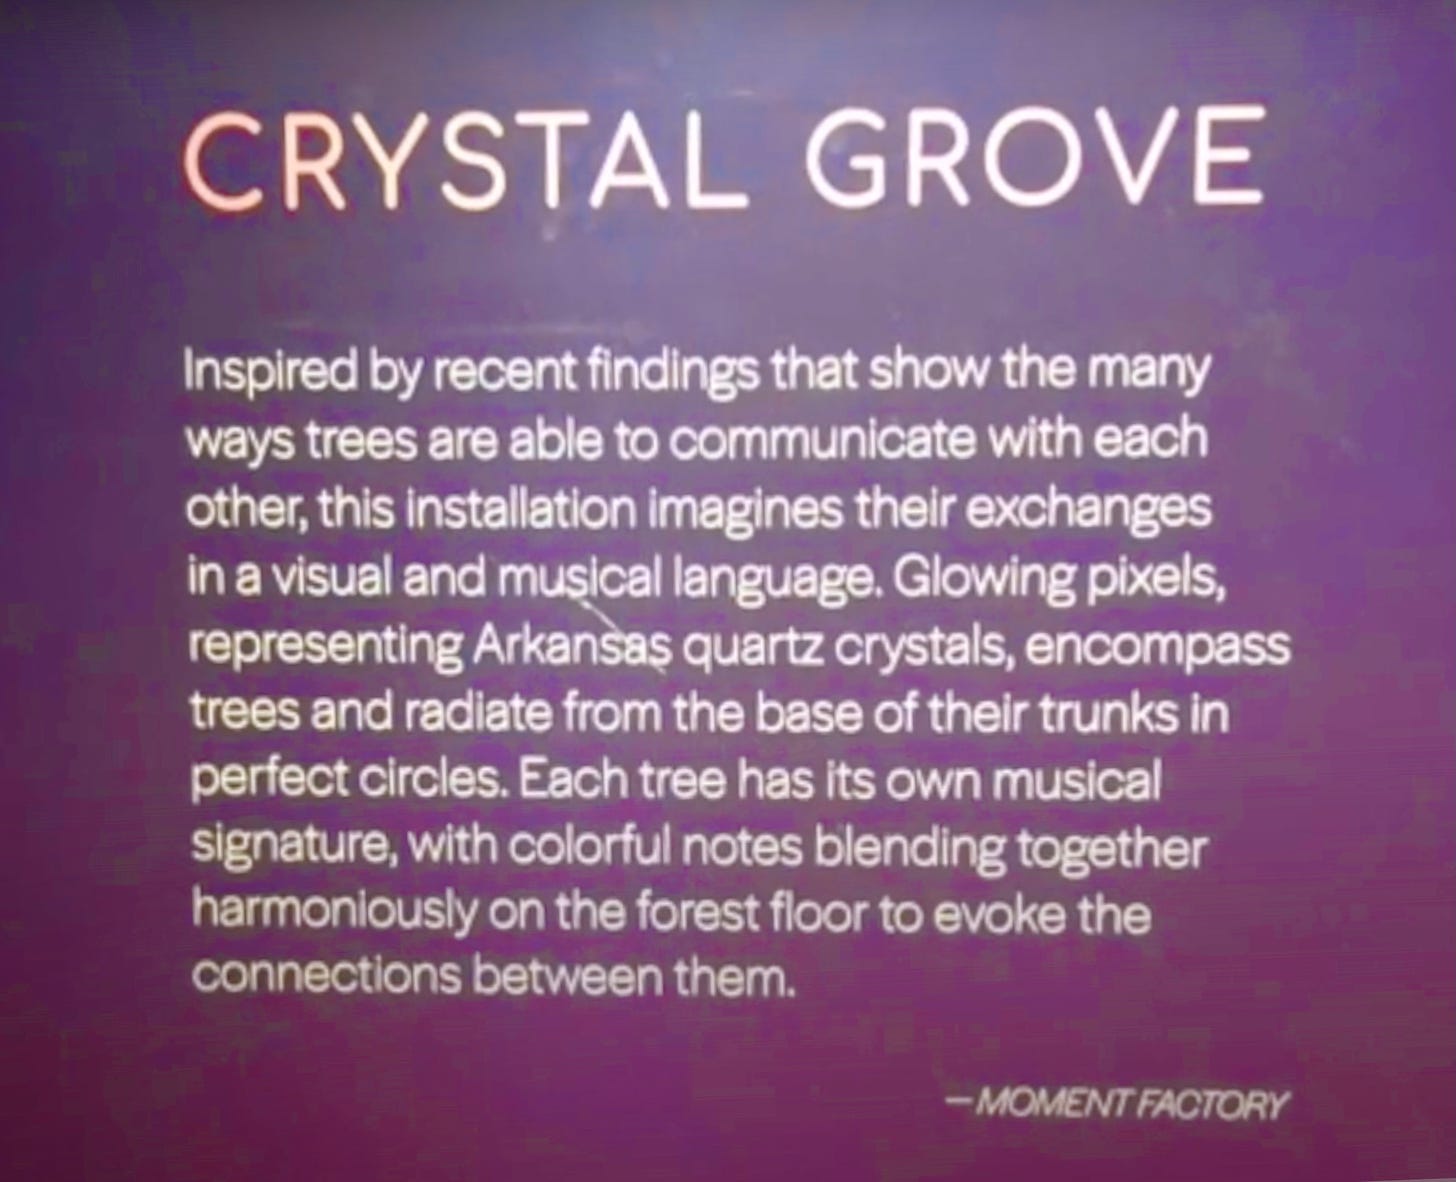 Crystal Grove: Inspired by recent findings that show the many ways trees are able to communicate with each other, this installation imagines their exchanges in a visual and musical language. Glowing pixels, representing Arkansas quartz crystals, encompass trees and radiate from the base of their trunks in perfect circles. Each tree has its own musical signature, with colorful notes blending together harmoniously on the forest floor to evoke the connections between them. Moment Factory